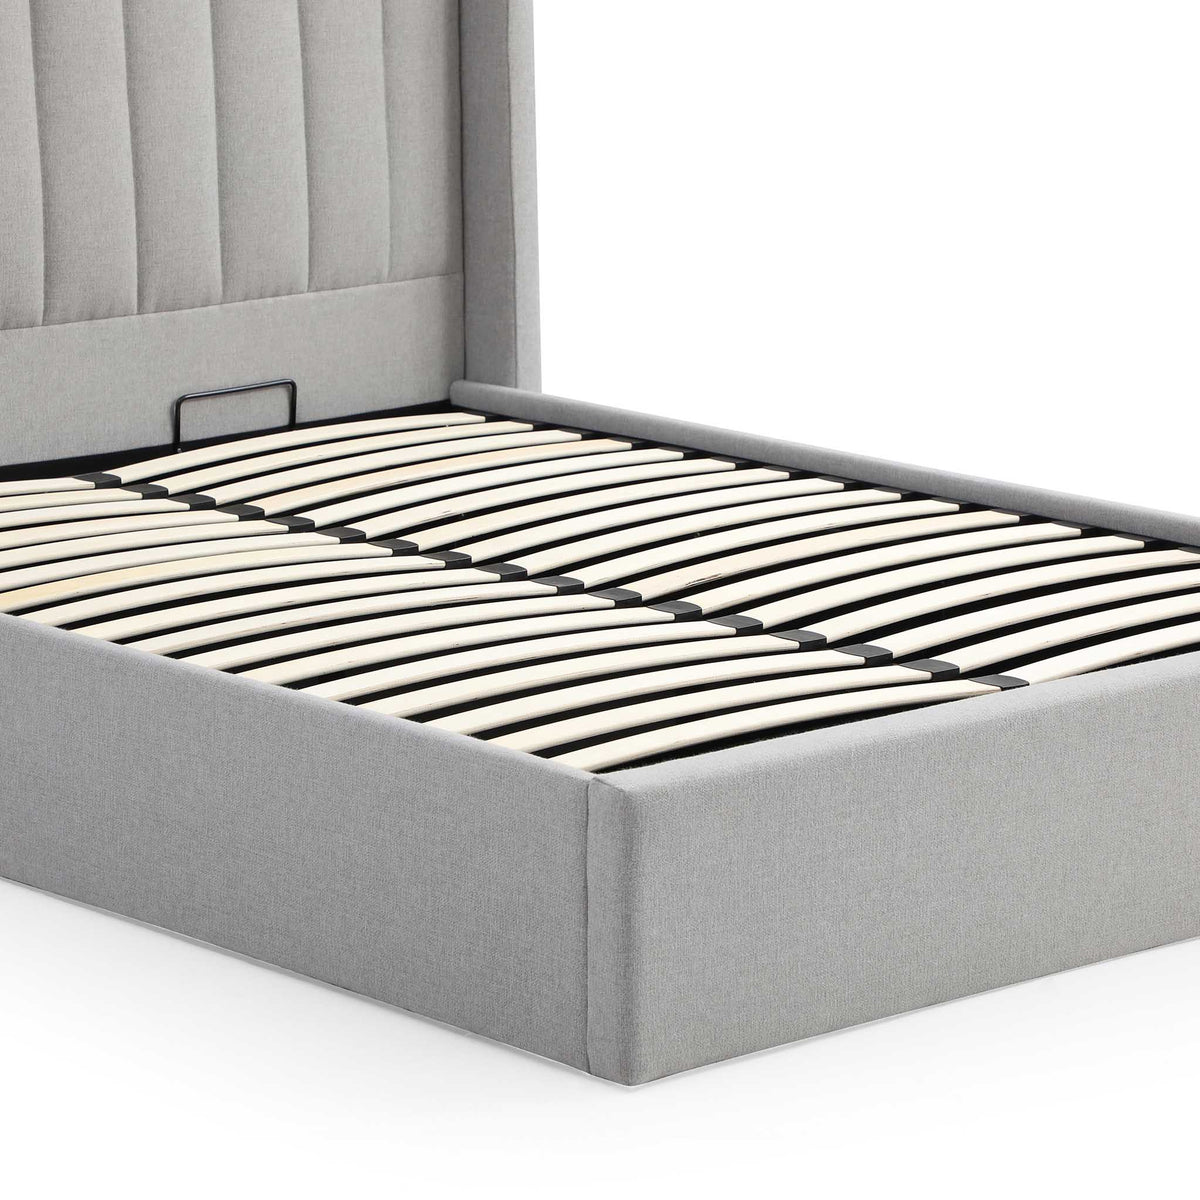 Maude Grey Faux Wool Ottoman Storage Bed Frame close up